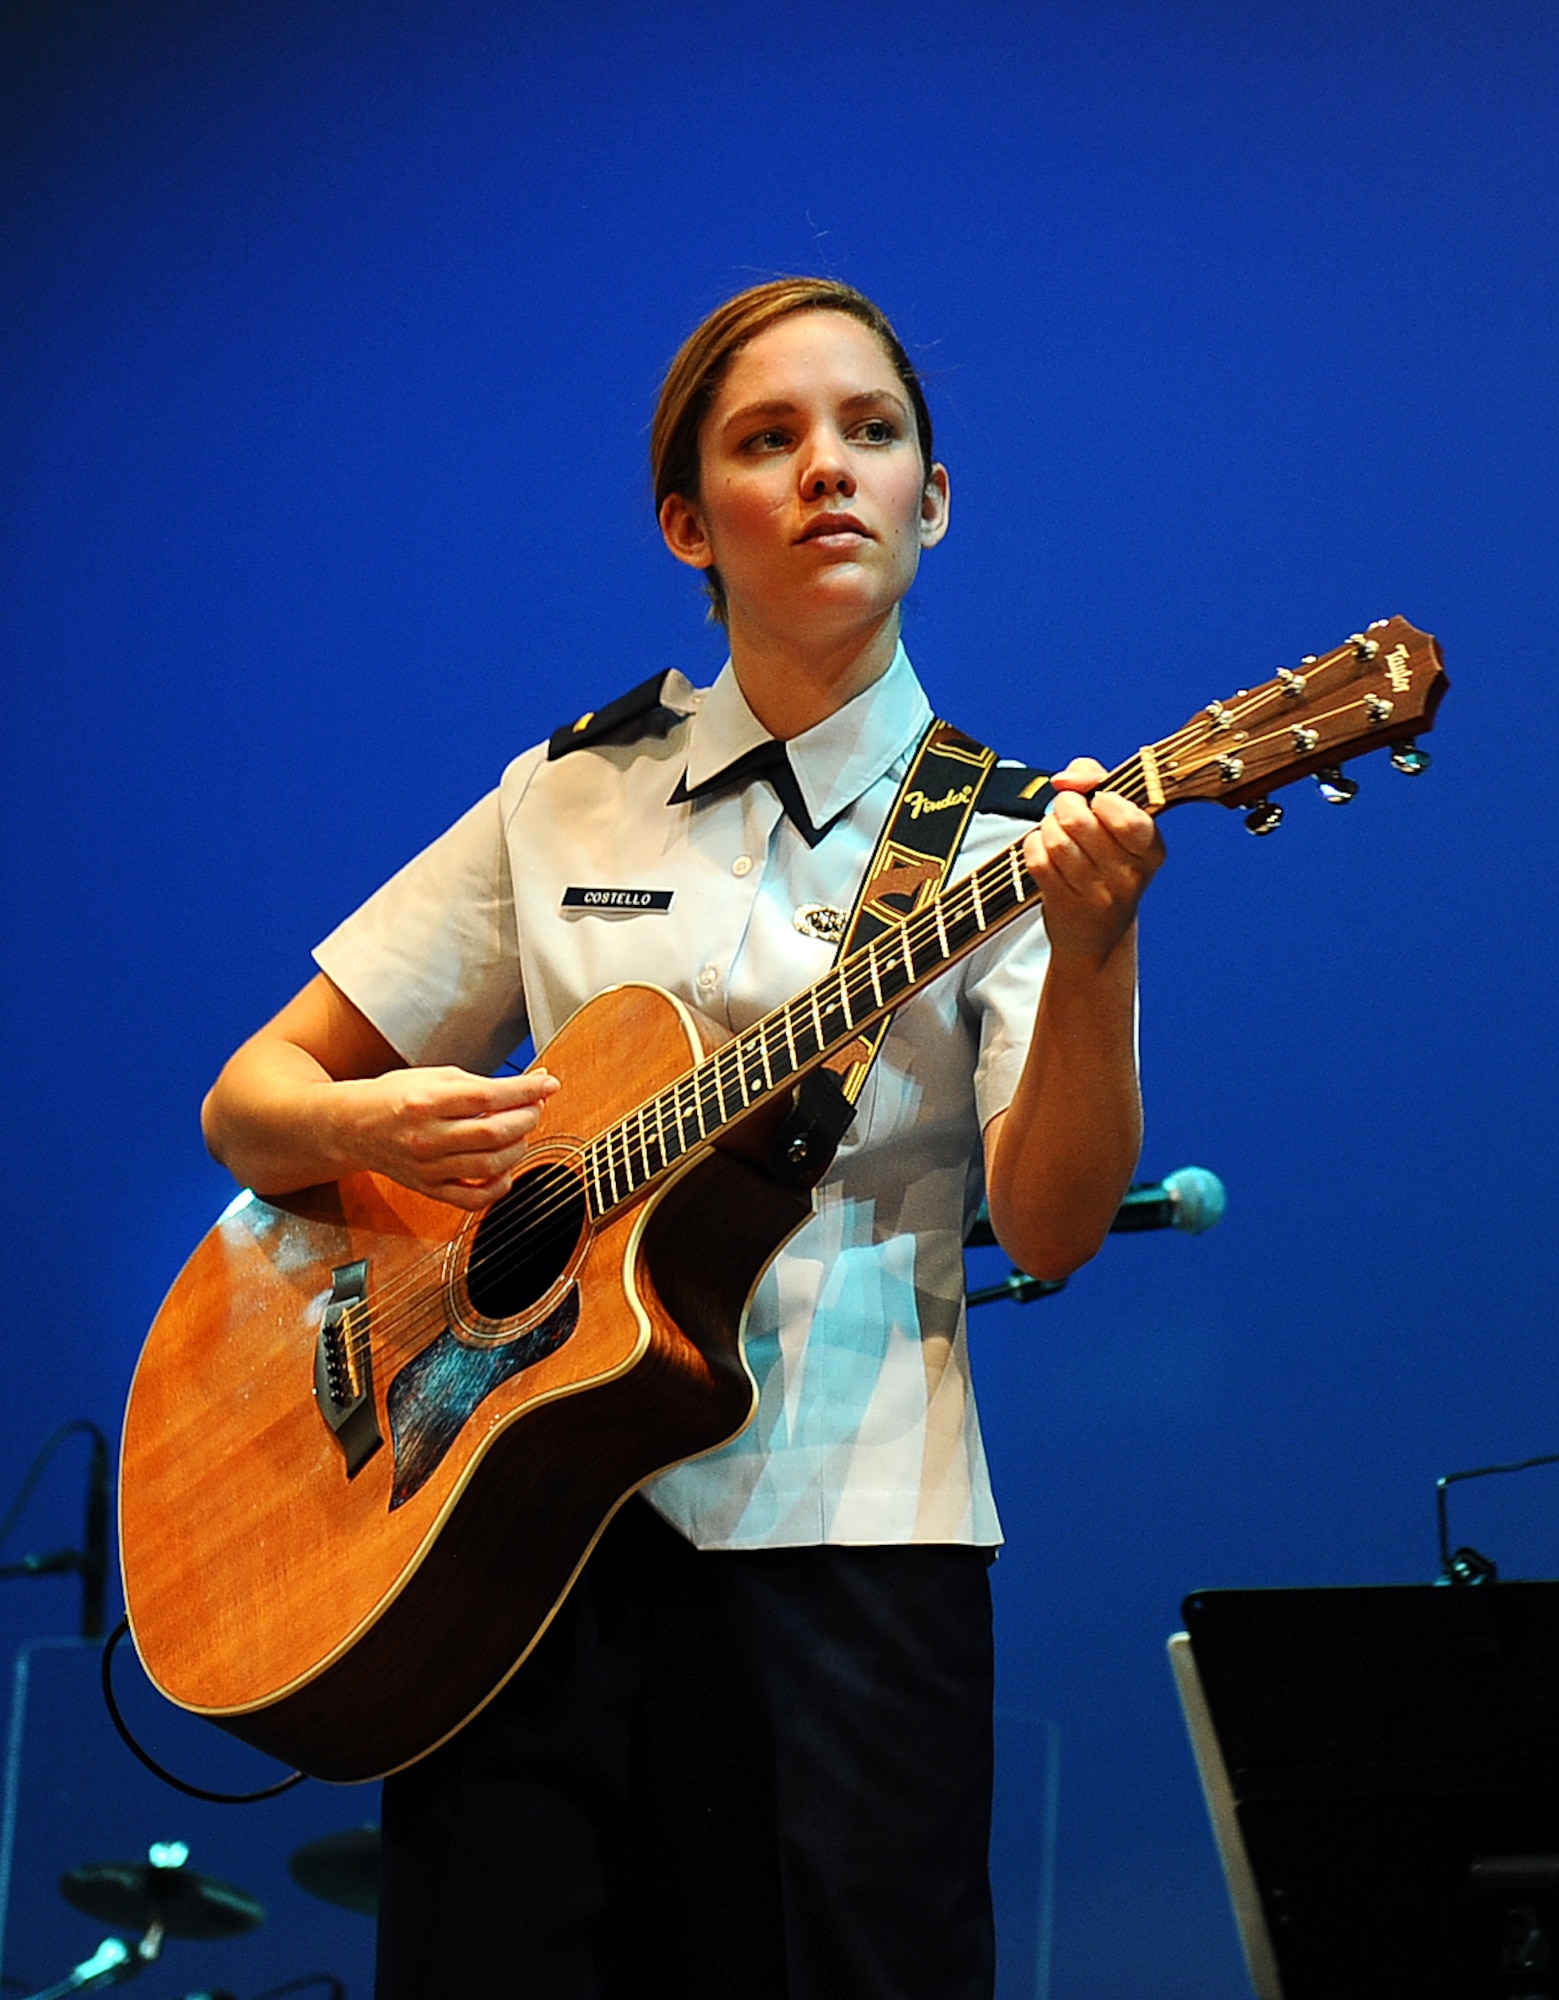 U.S. Air Force 2nd Lt. Carly Costello, 55th Wing Public Affairs Officer, plays guitar with the U.S. Air Force’s Heartland of America Band at Blair High School on Nov. 8, 2014.  The Salute to Veterans concert Series was a five-day venture with thousands of attendees.  (U.S. Air Force photo by Josh Plueger/Released)